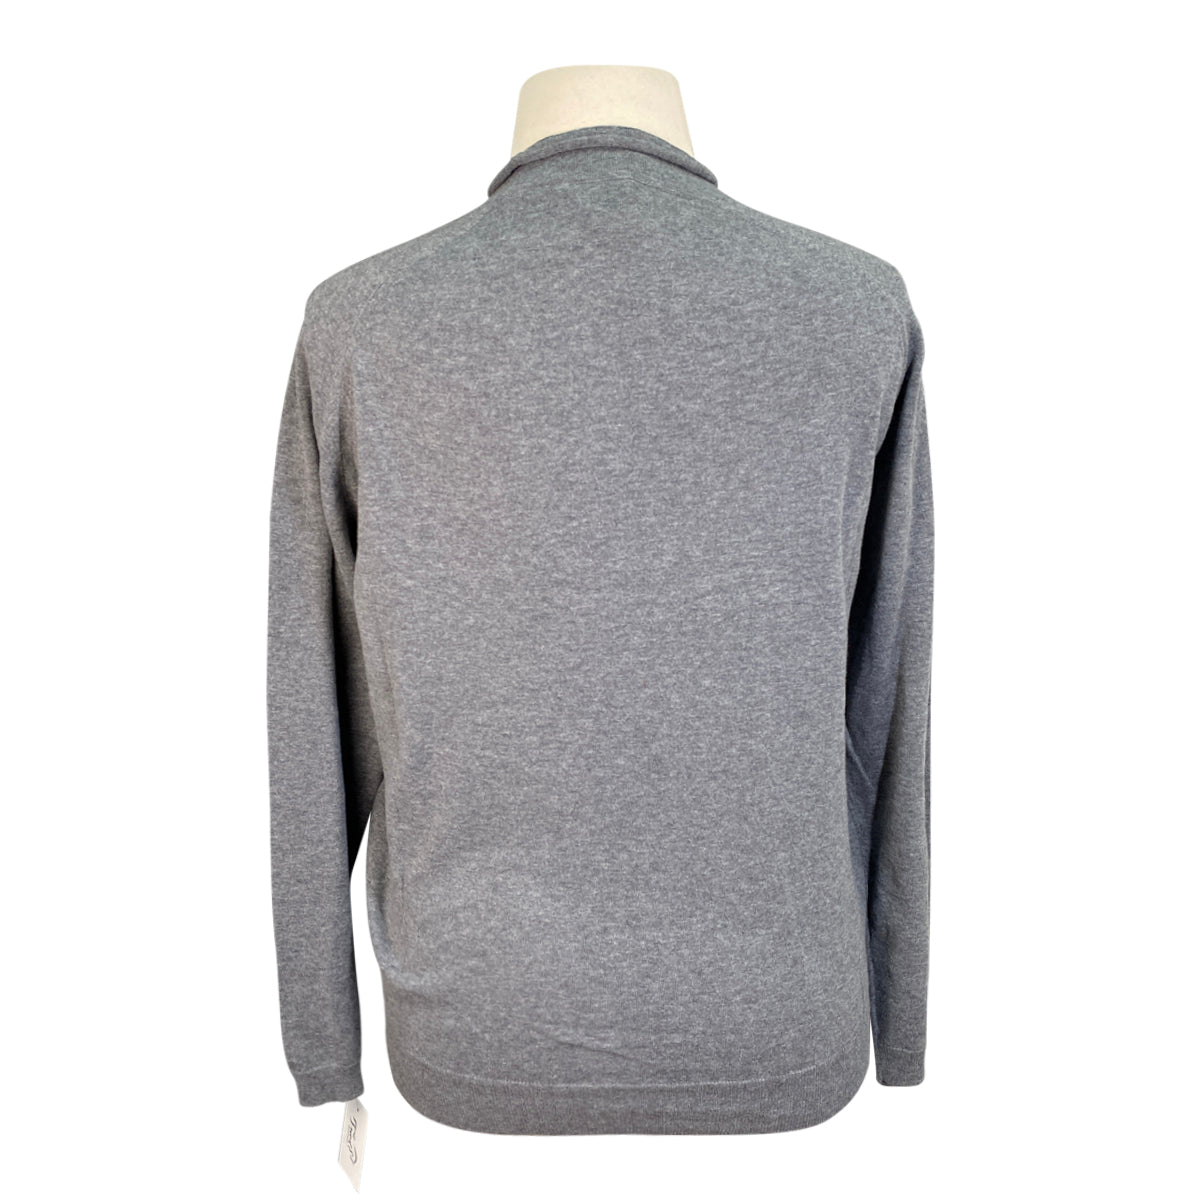 Callidae 'The Lightweight Mock' L/S Shirt in Pewter